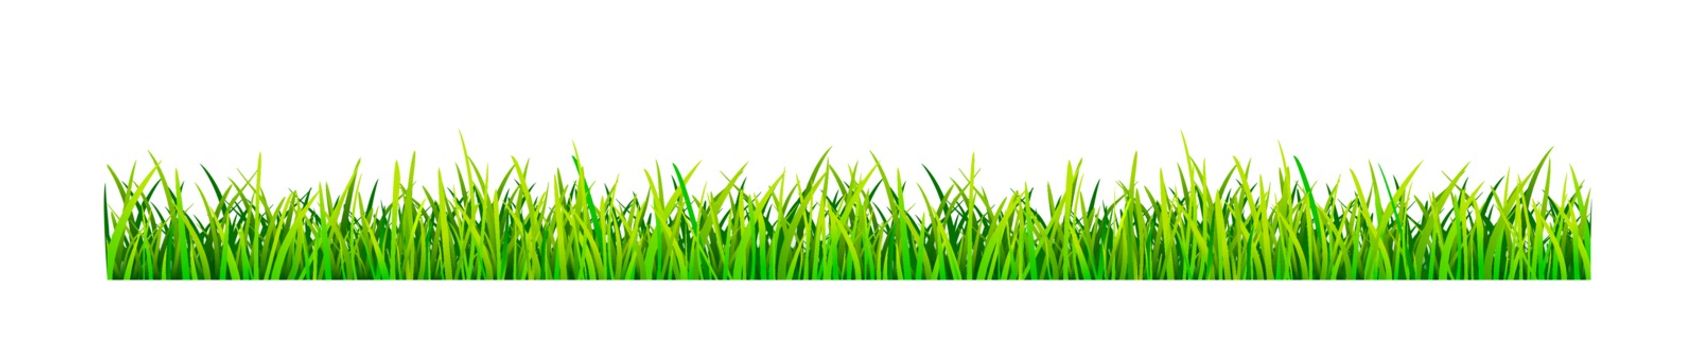 Grassy lawn on a white background. Green grass banner.